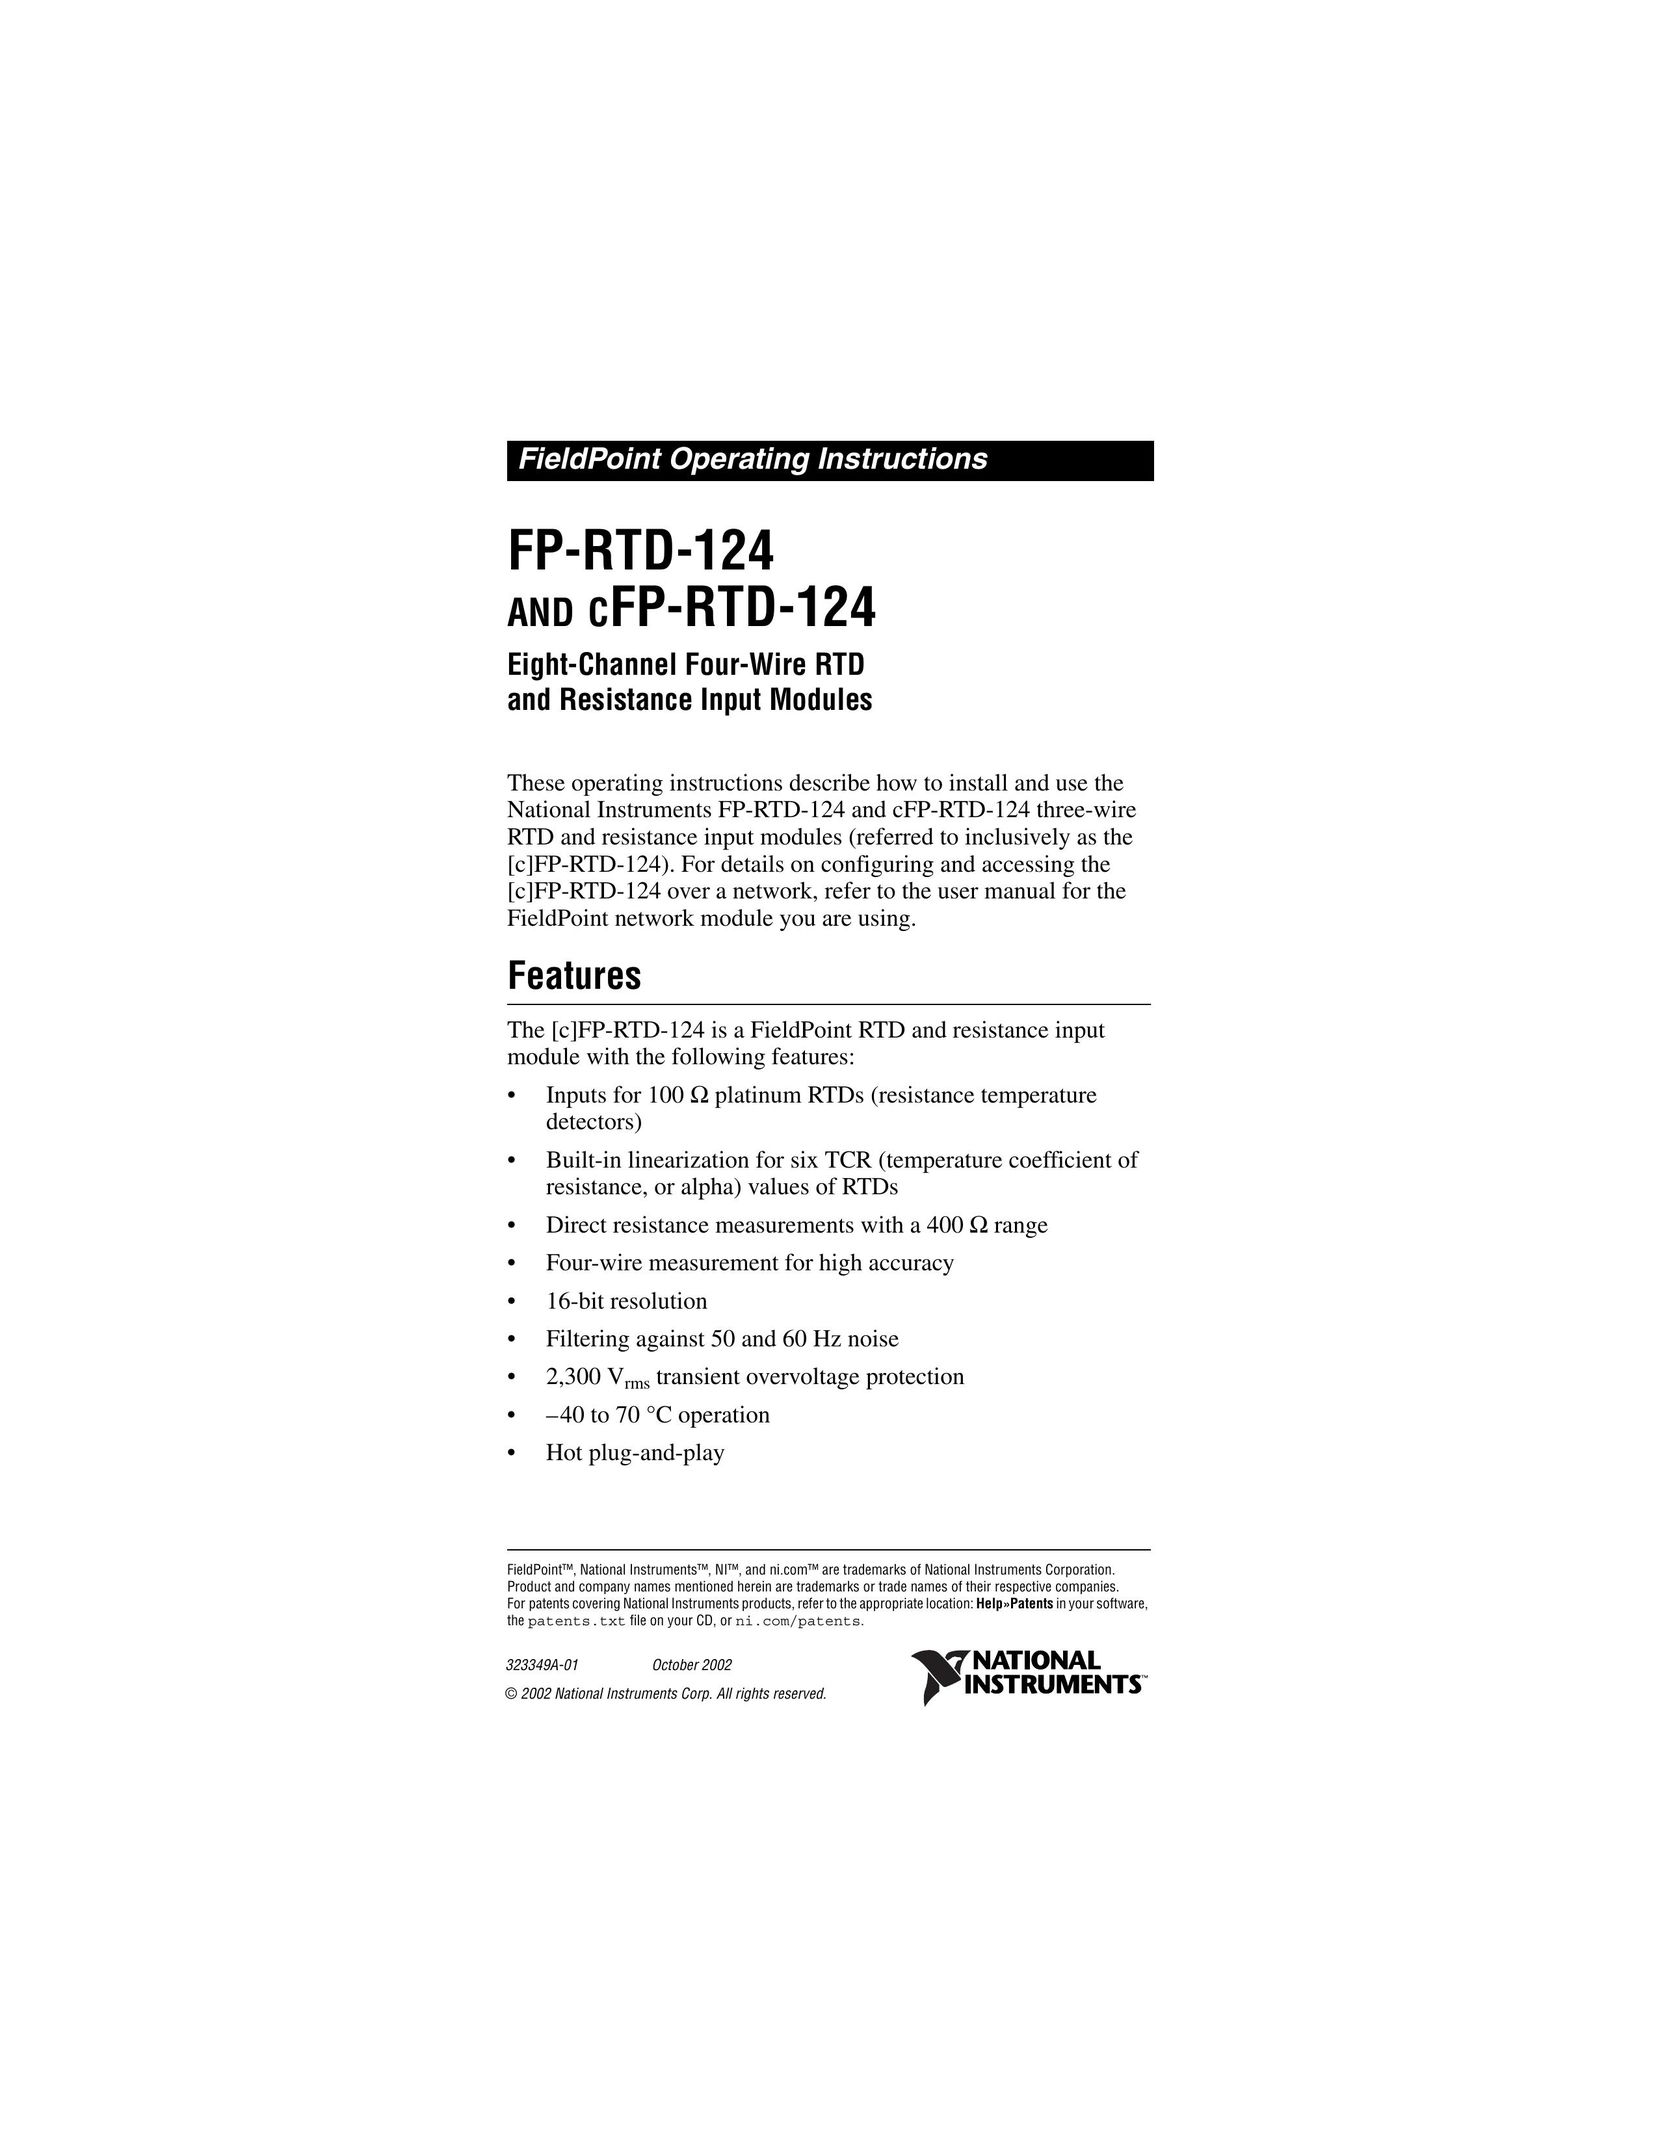 National Instruments FP-RTD-124 Network Router User Manual